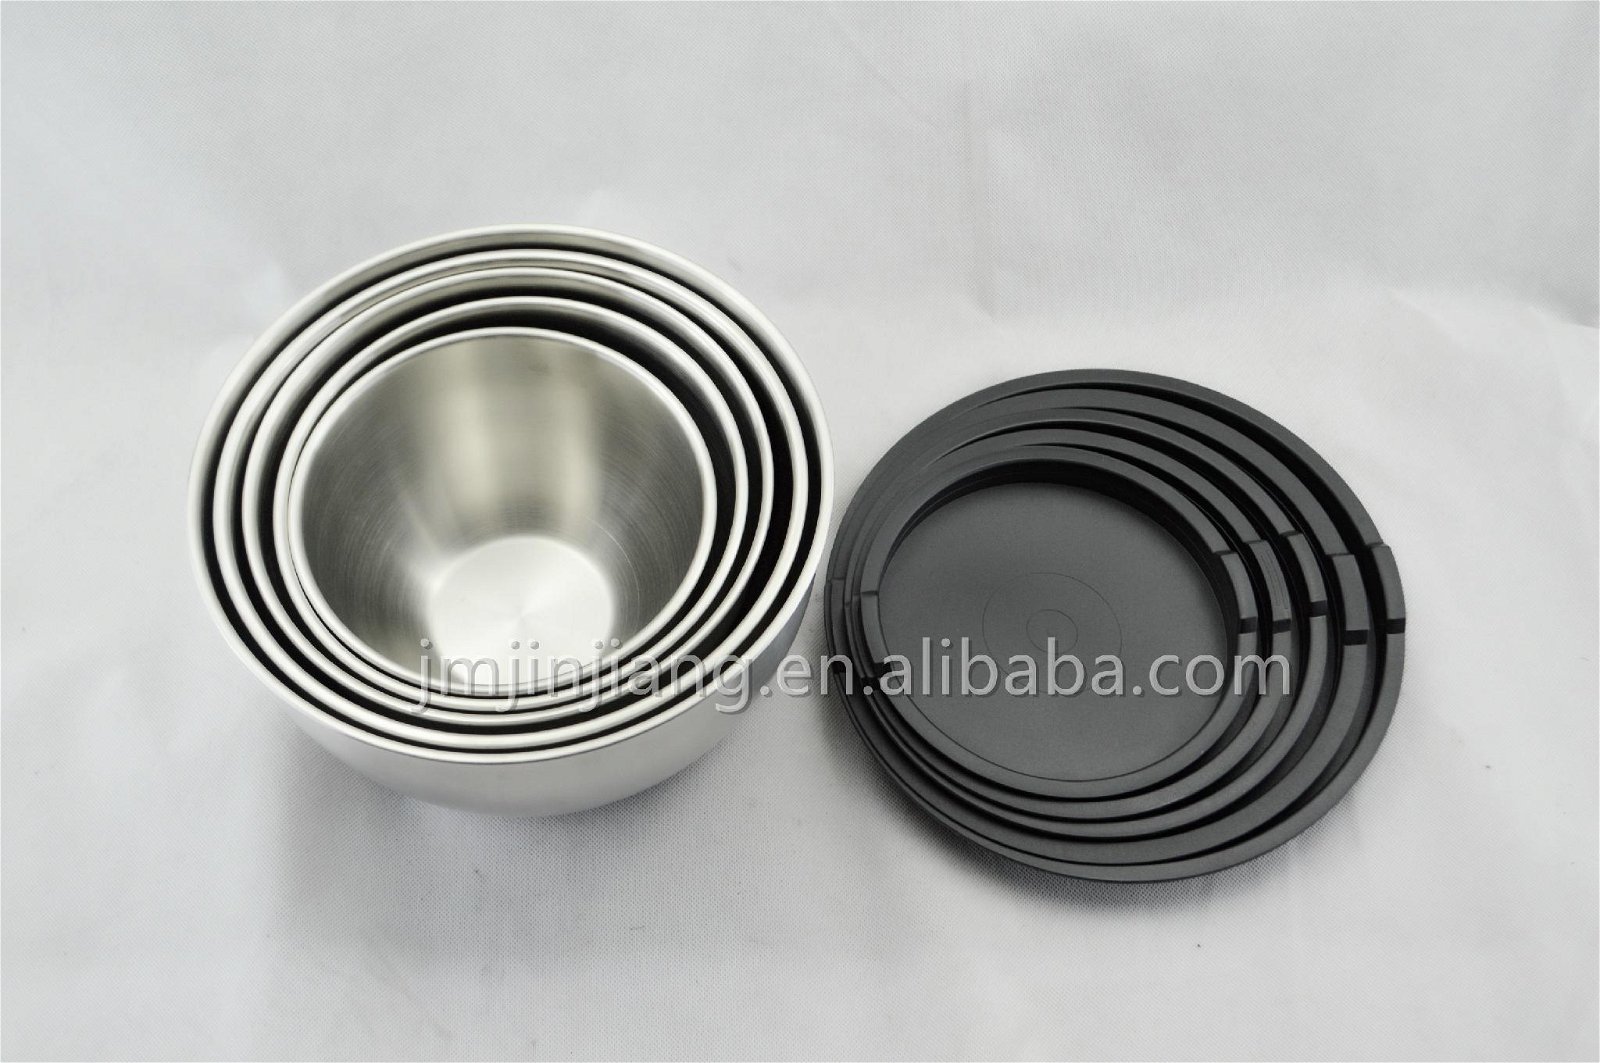 Stainless Steel mixing Salad Bowl non-slip 2